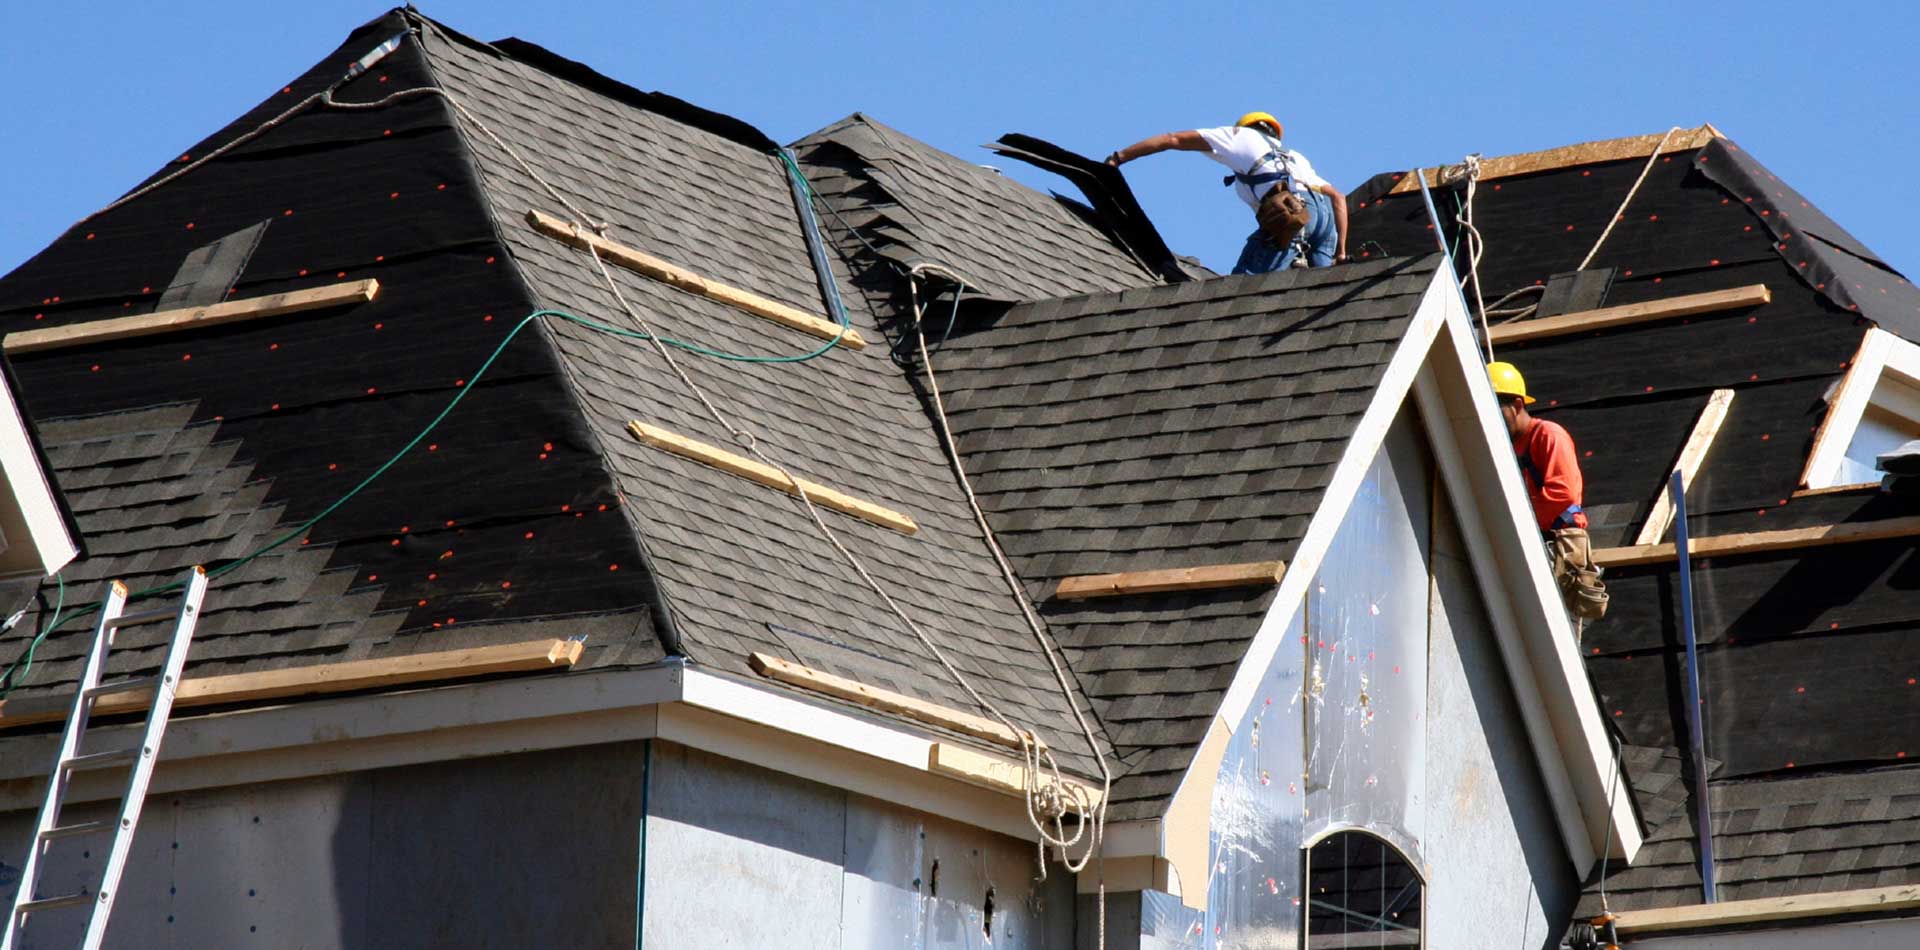 5 Questions Ask a Roofing Contractor Before Starting Project